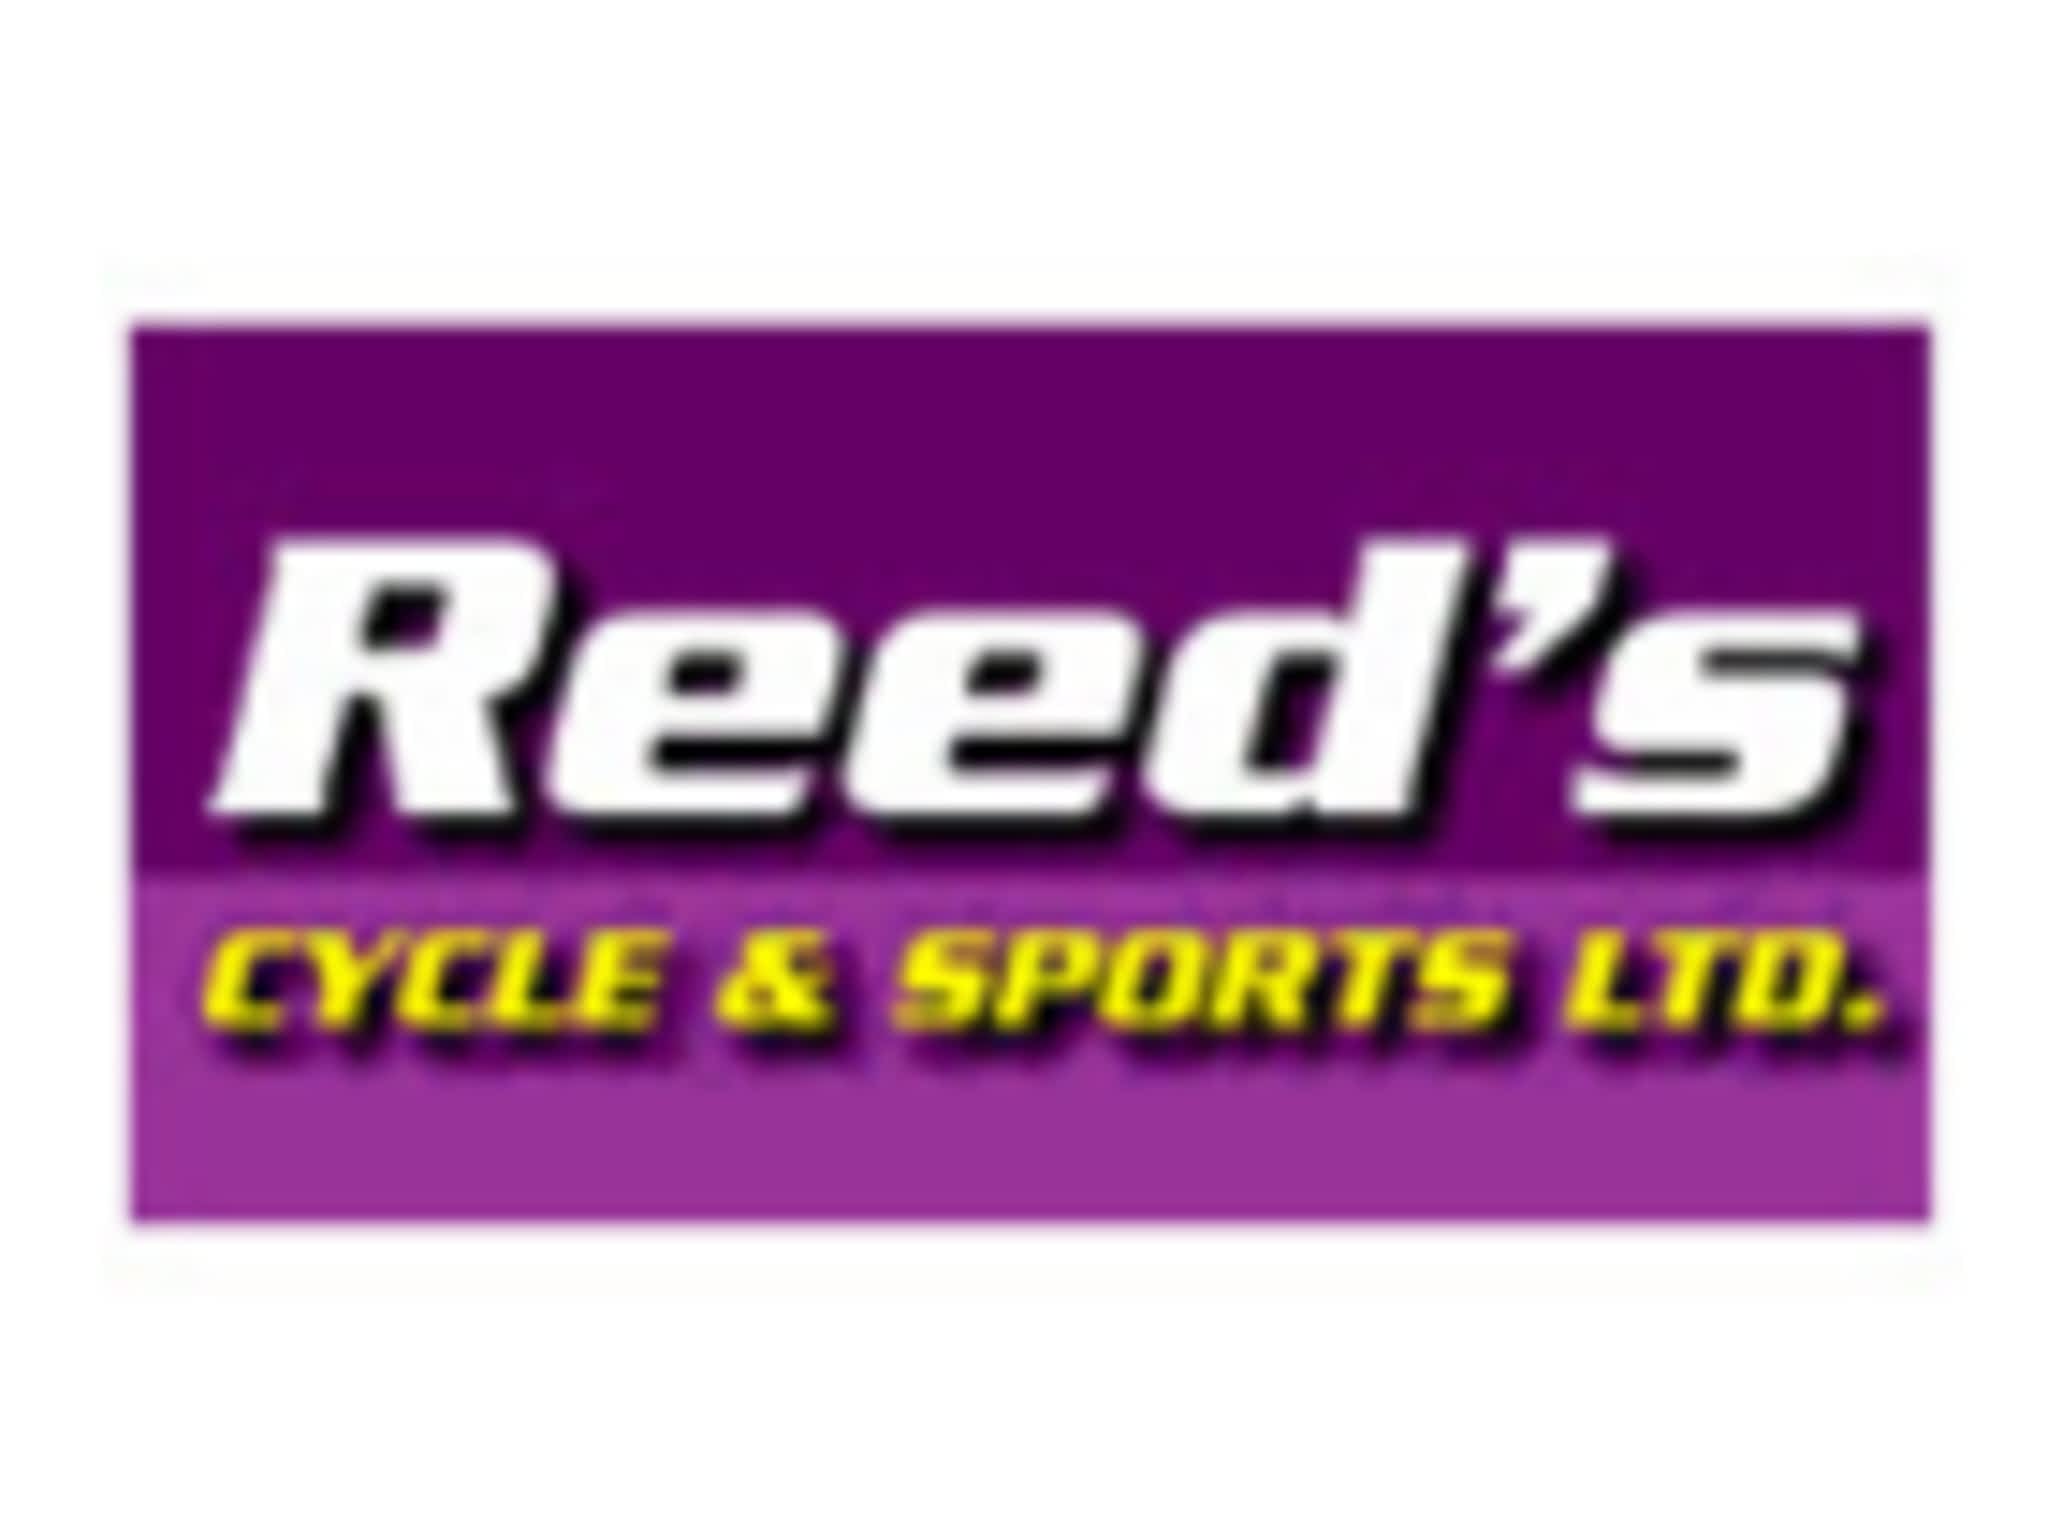 photo Reed's Cycle & Sports